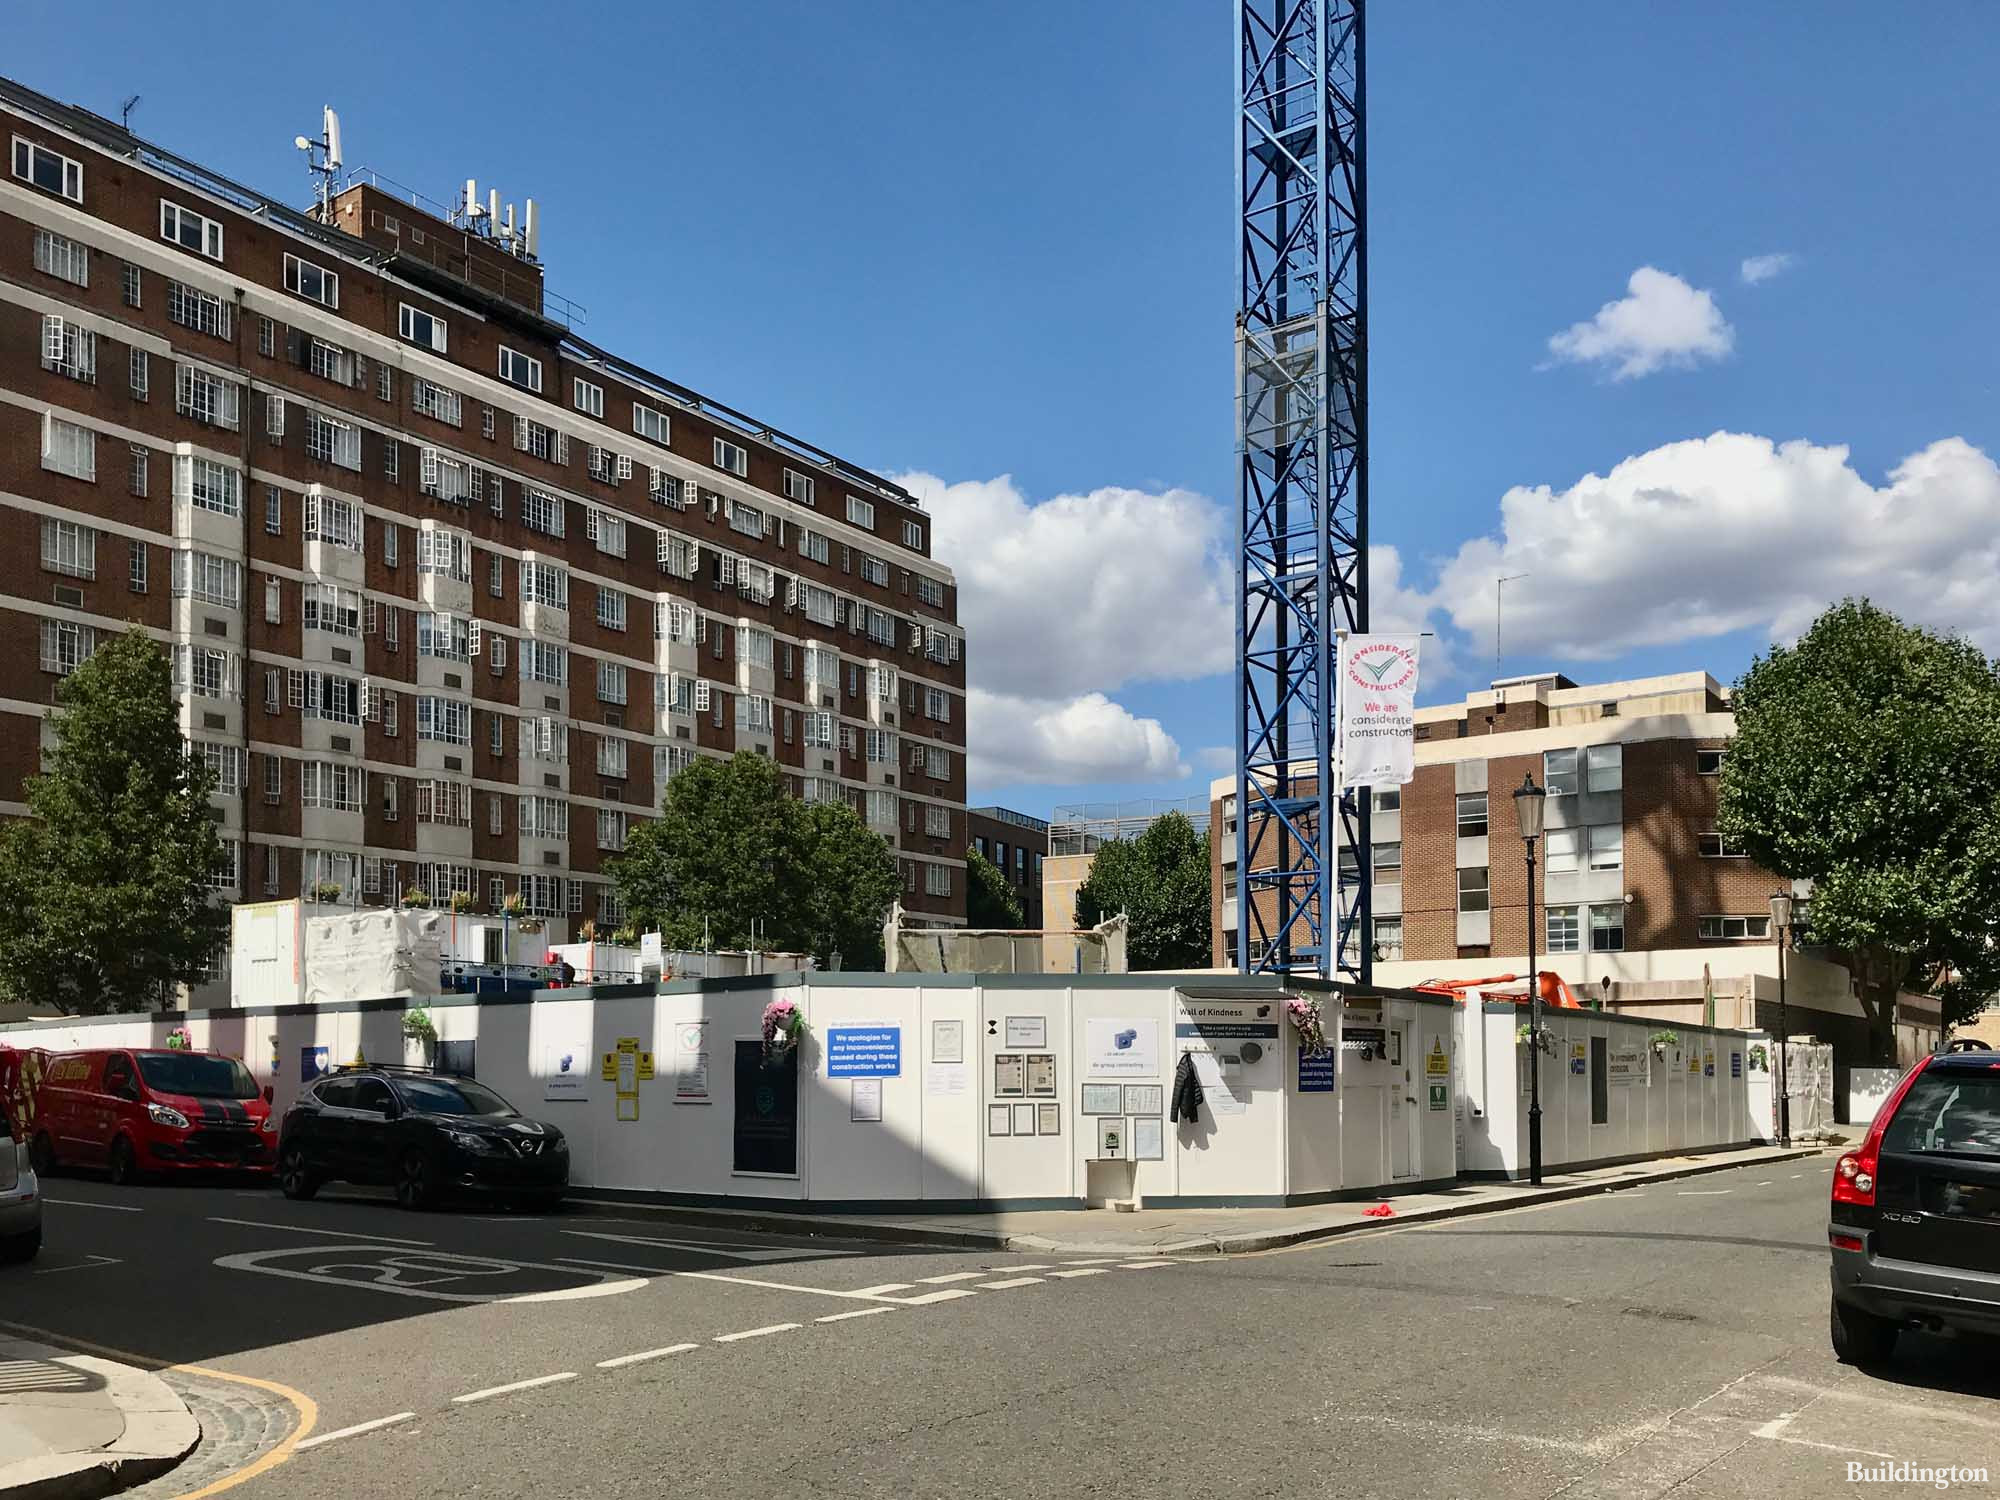 The Lucan - Autograph Collection Residences development site on the corner of Lucan Place and Petyward in August 2022. Chelsea Cloisters apartments in the background.